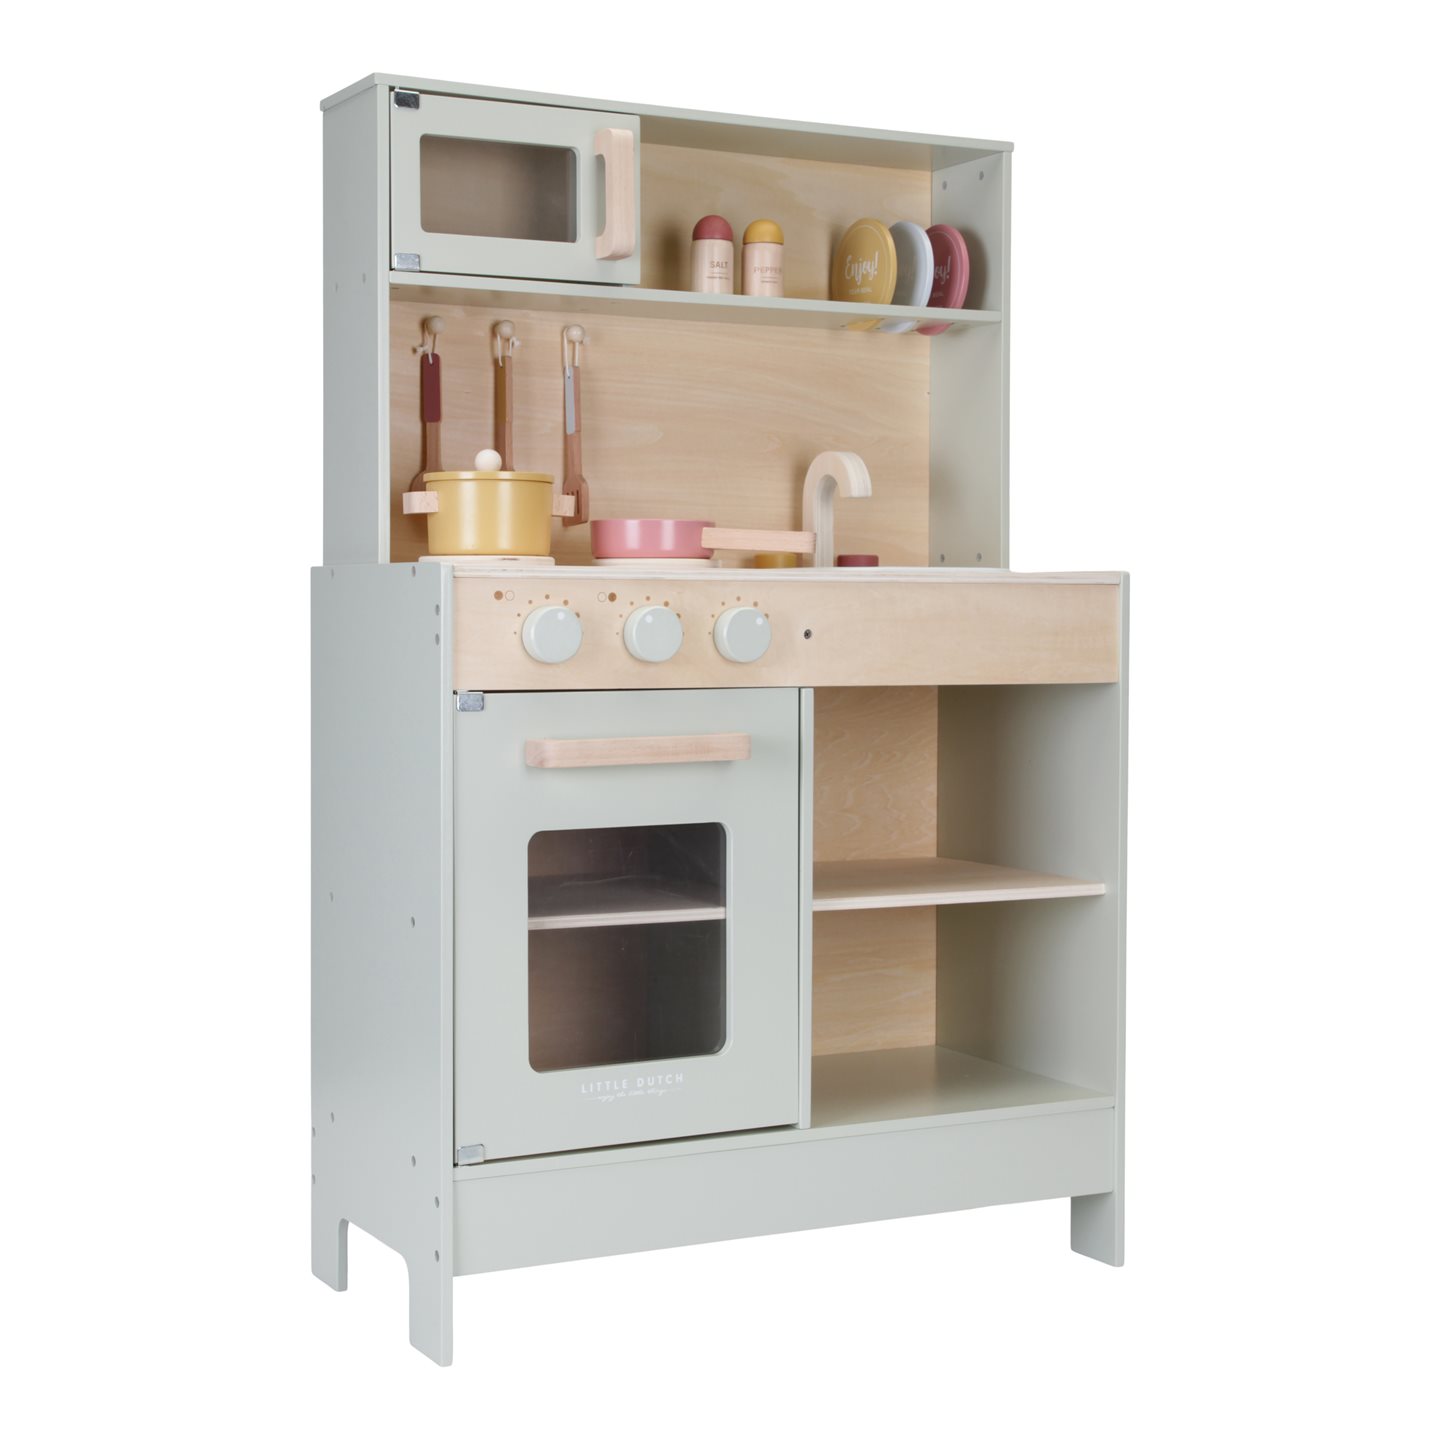 Wooden Play Kitchen, Play Kitchen With Accessories in Mint